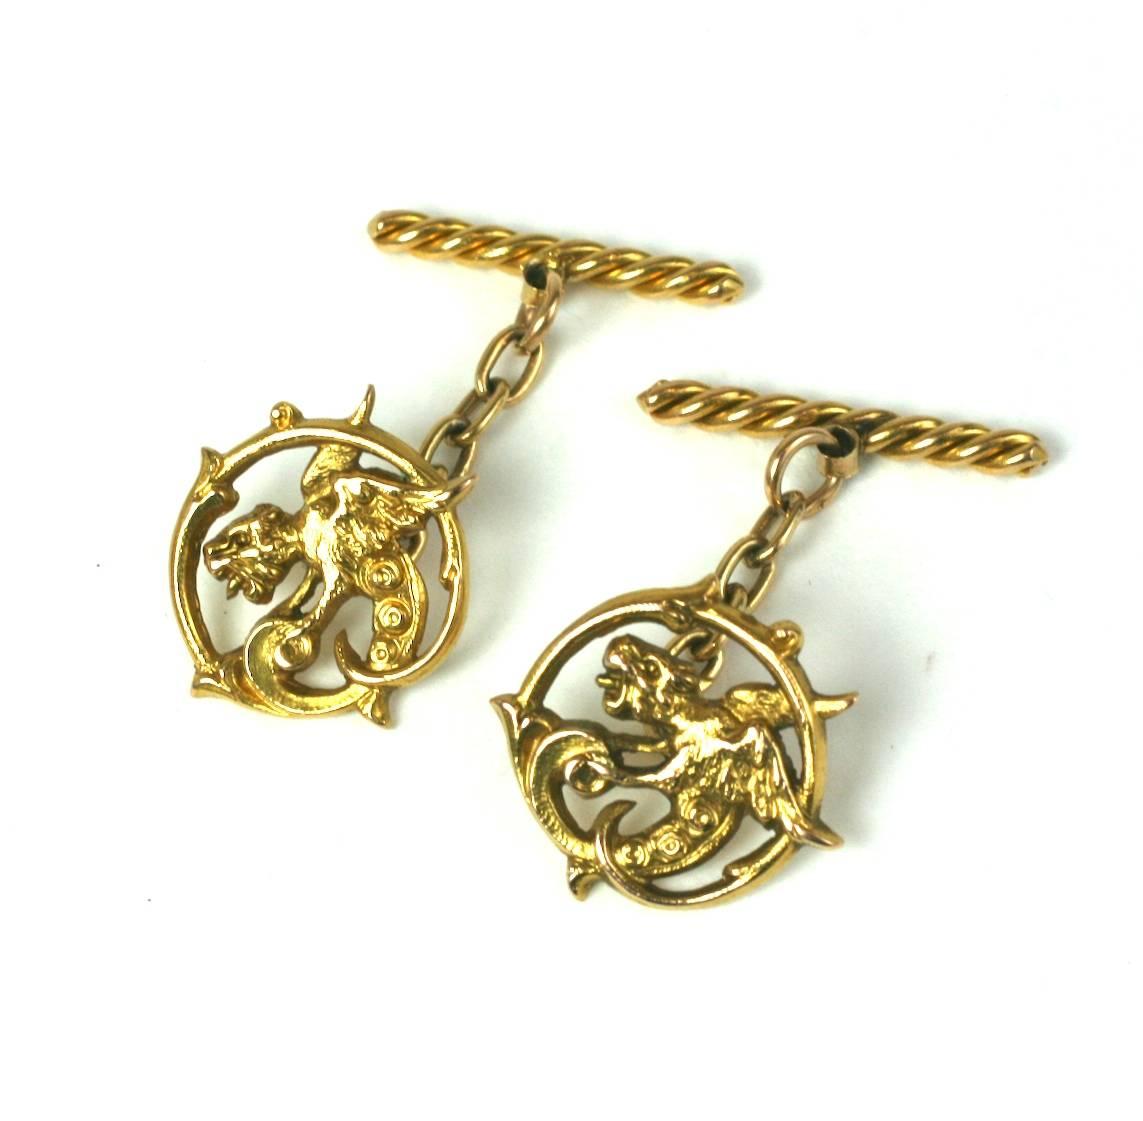 Victorian Griffin 18K Cufflinks with chain and twisted bar toggle. Late 19th Century with wonderful sharp detailing on griffin motifs. Excellent condition. 
Cufflink Face .75